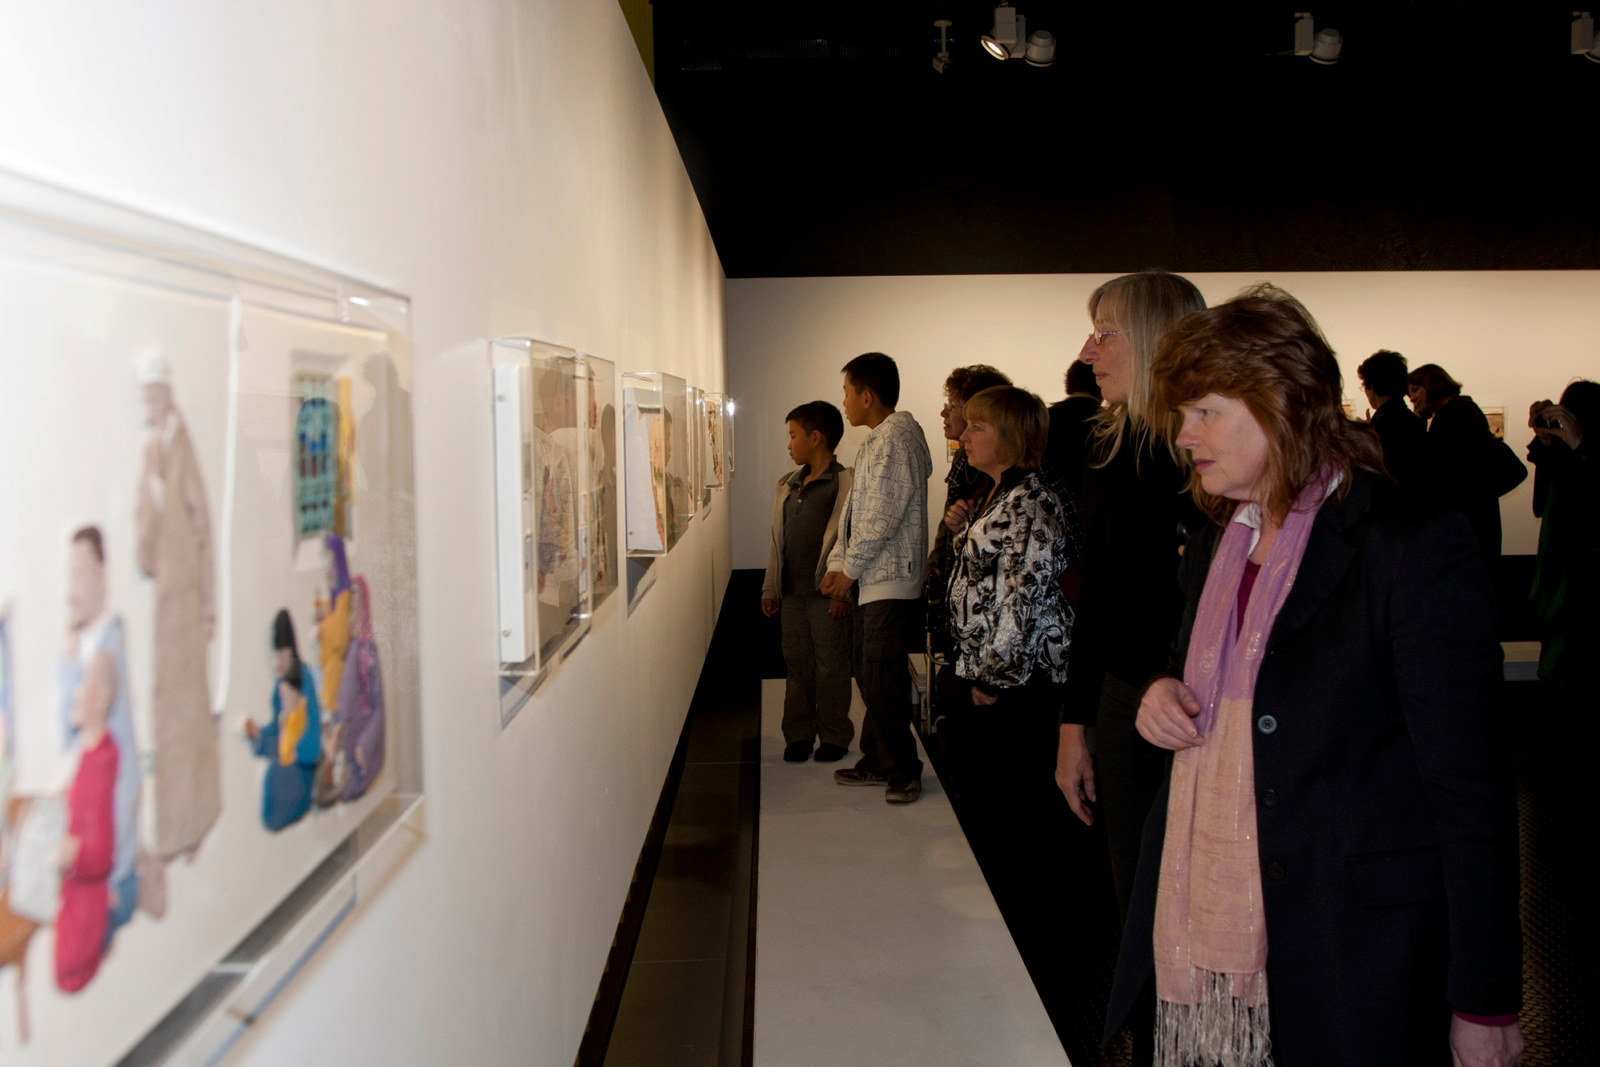 Guests looking at artworks in Theme Gallery exhibition space